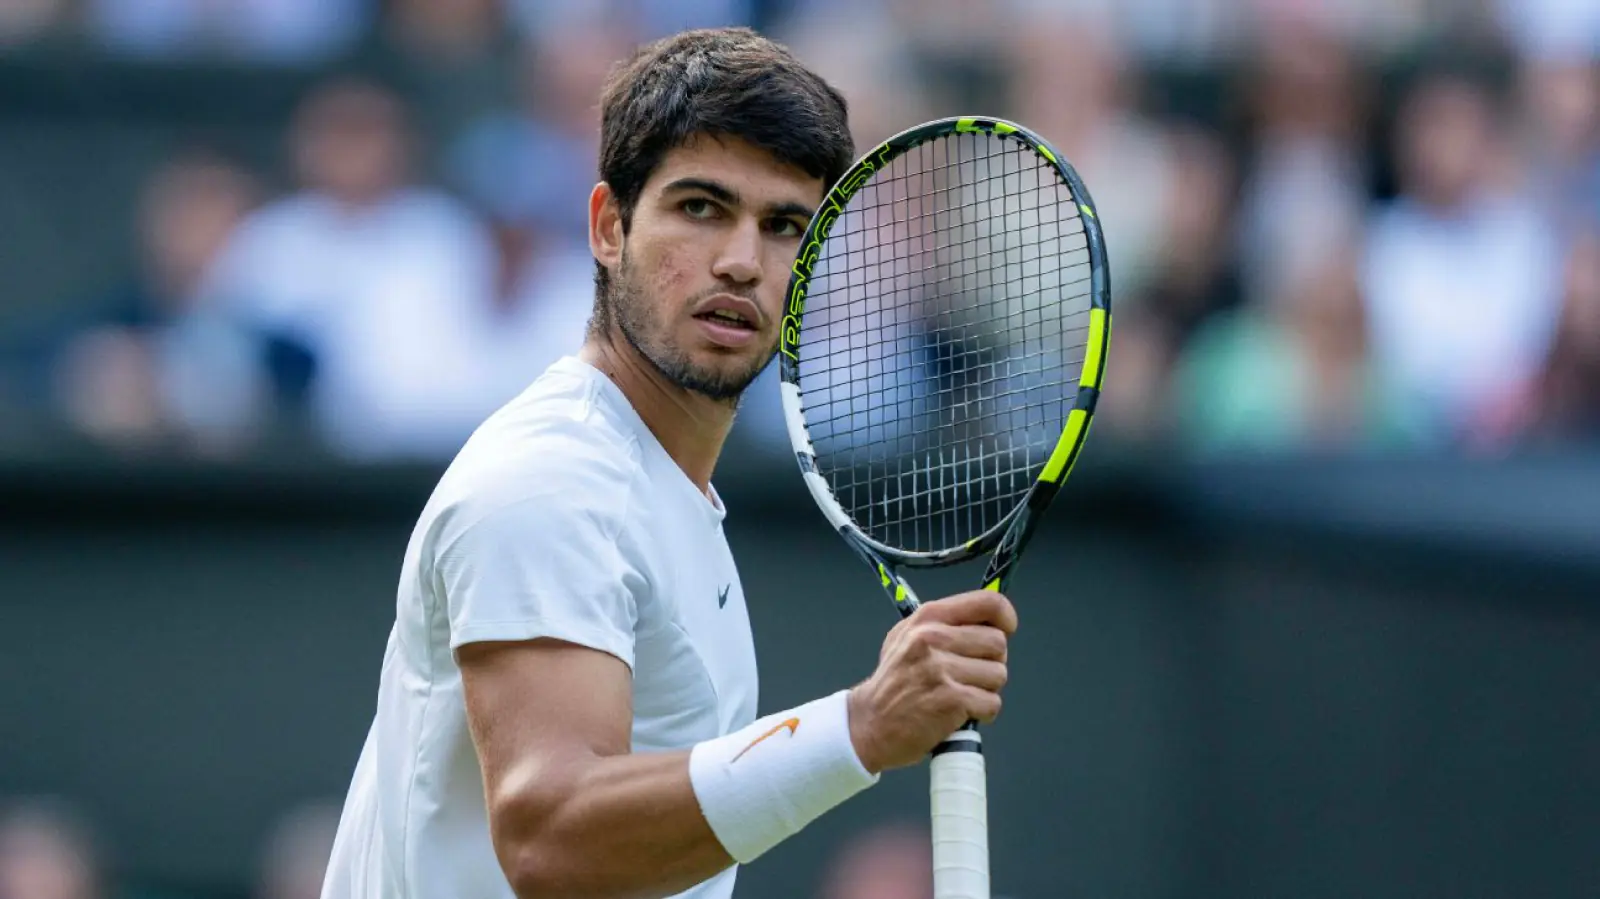 Wimbledon Tennis: Champion Alcaraz's first-round path is very easy